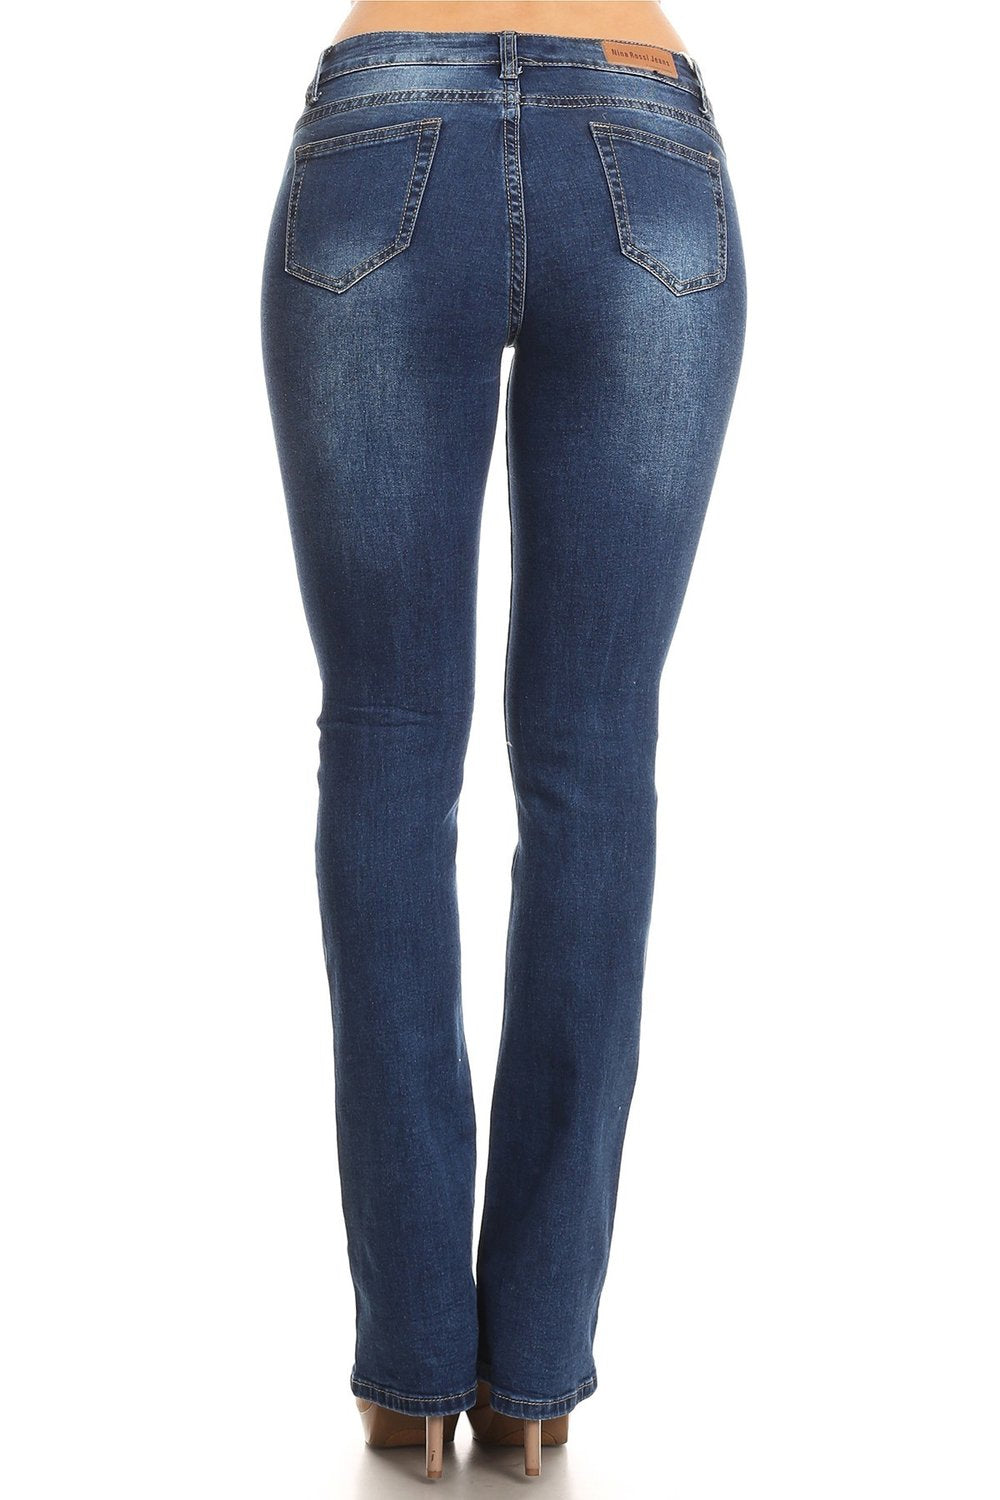 Sadie Boot Cut Stretch Jeans - Corinne an Affordable Women's Clothing Boutique in the US USA